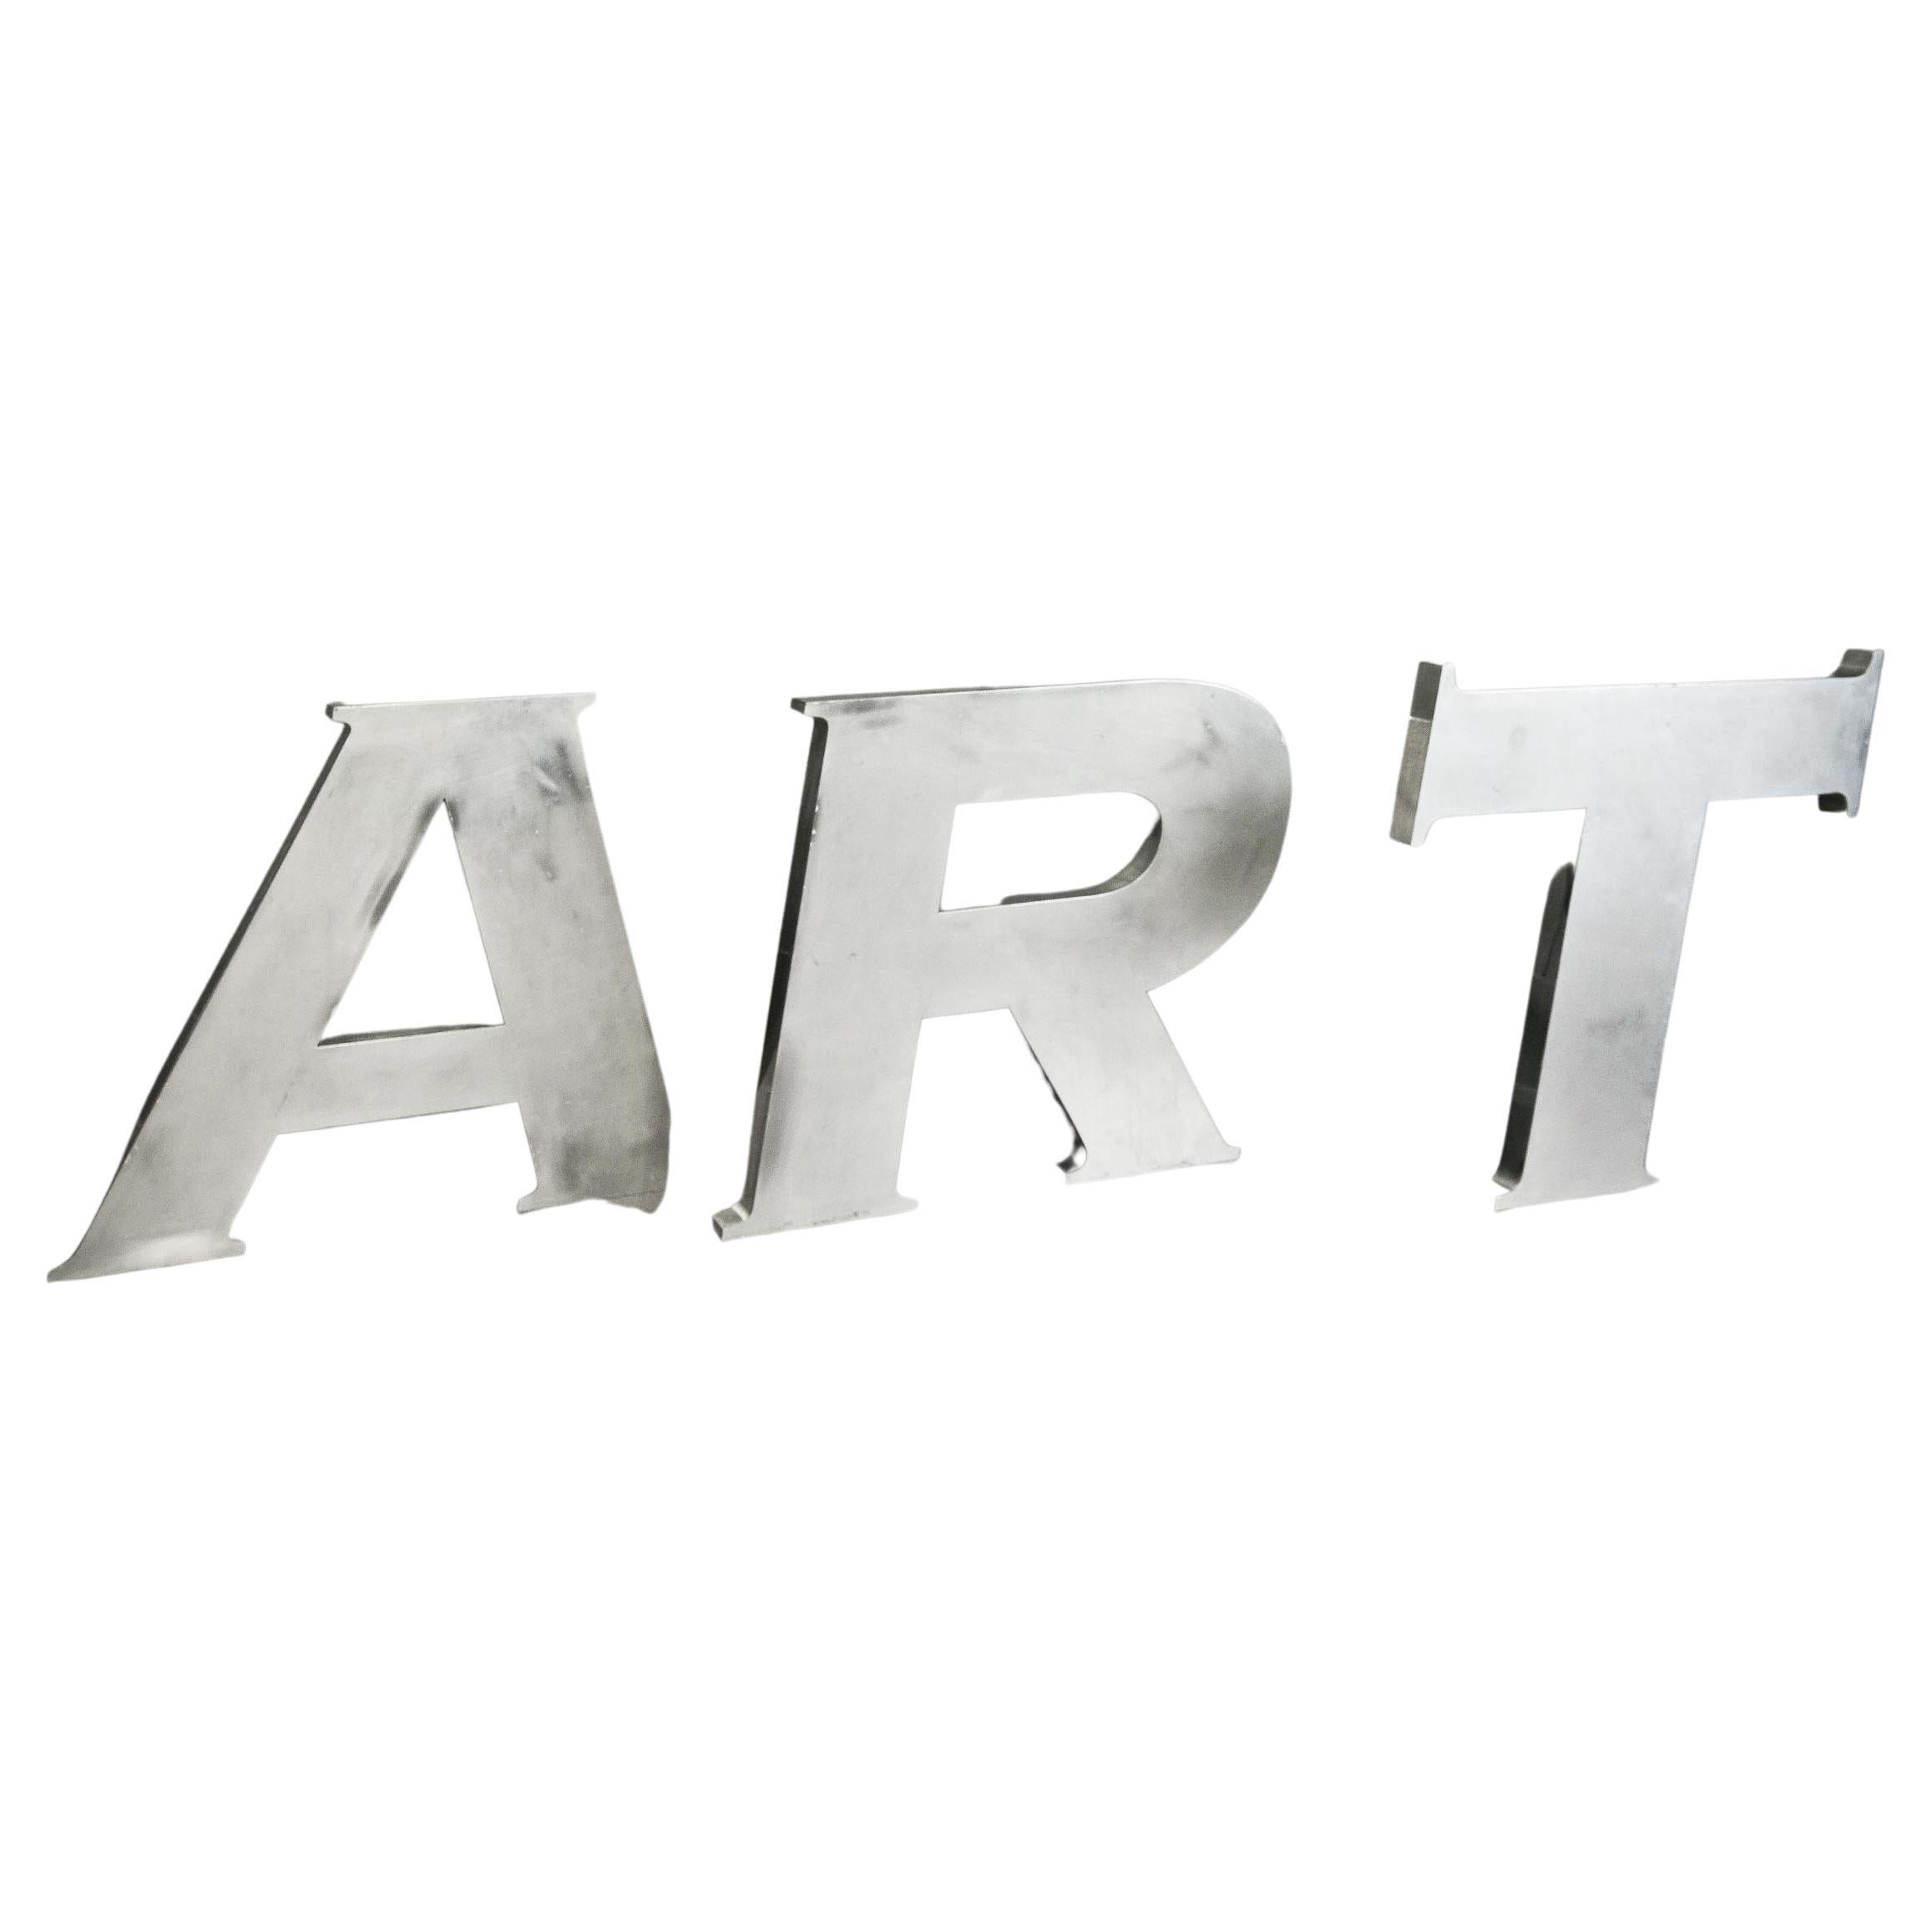 Chromed Stainless Steel Letters A-R-T For Sale